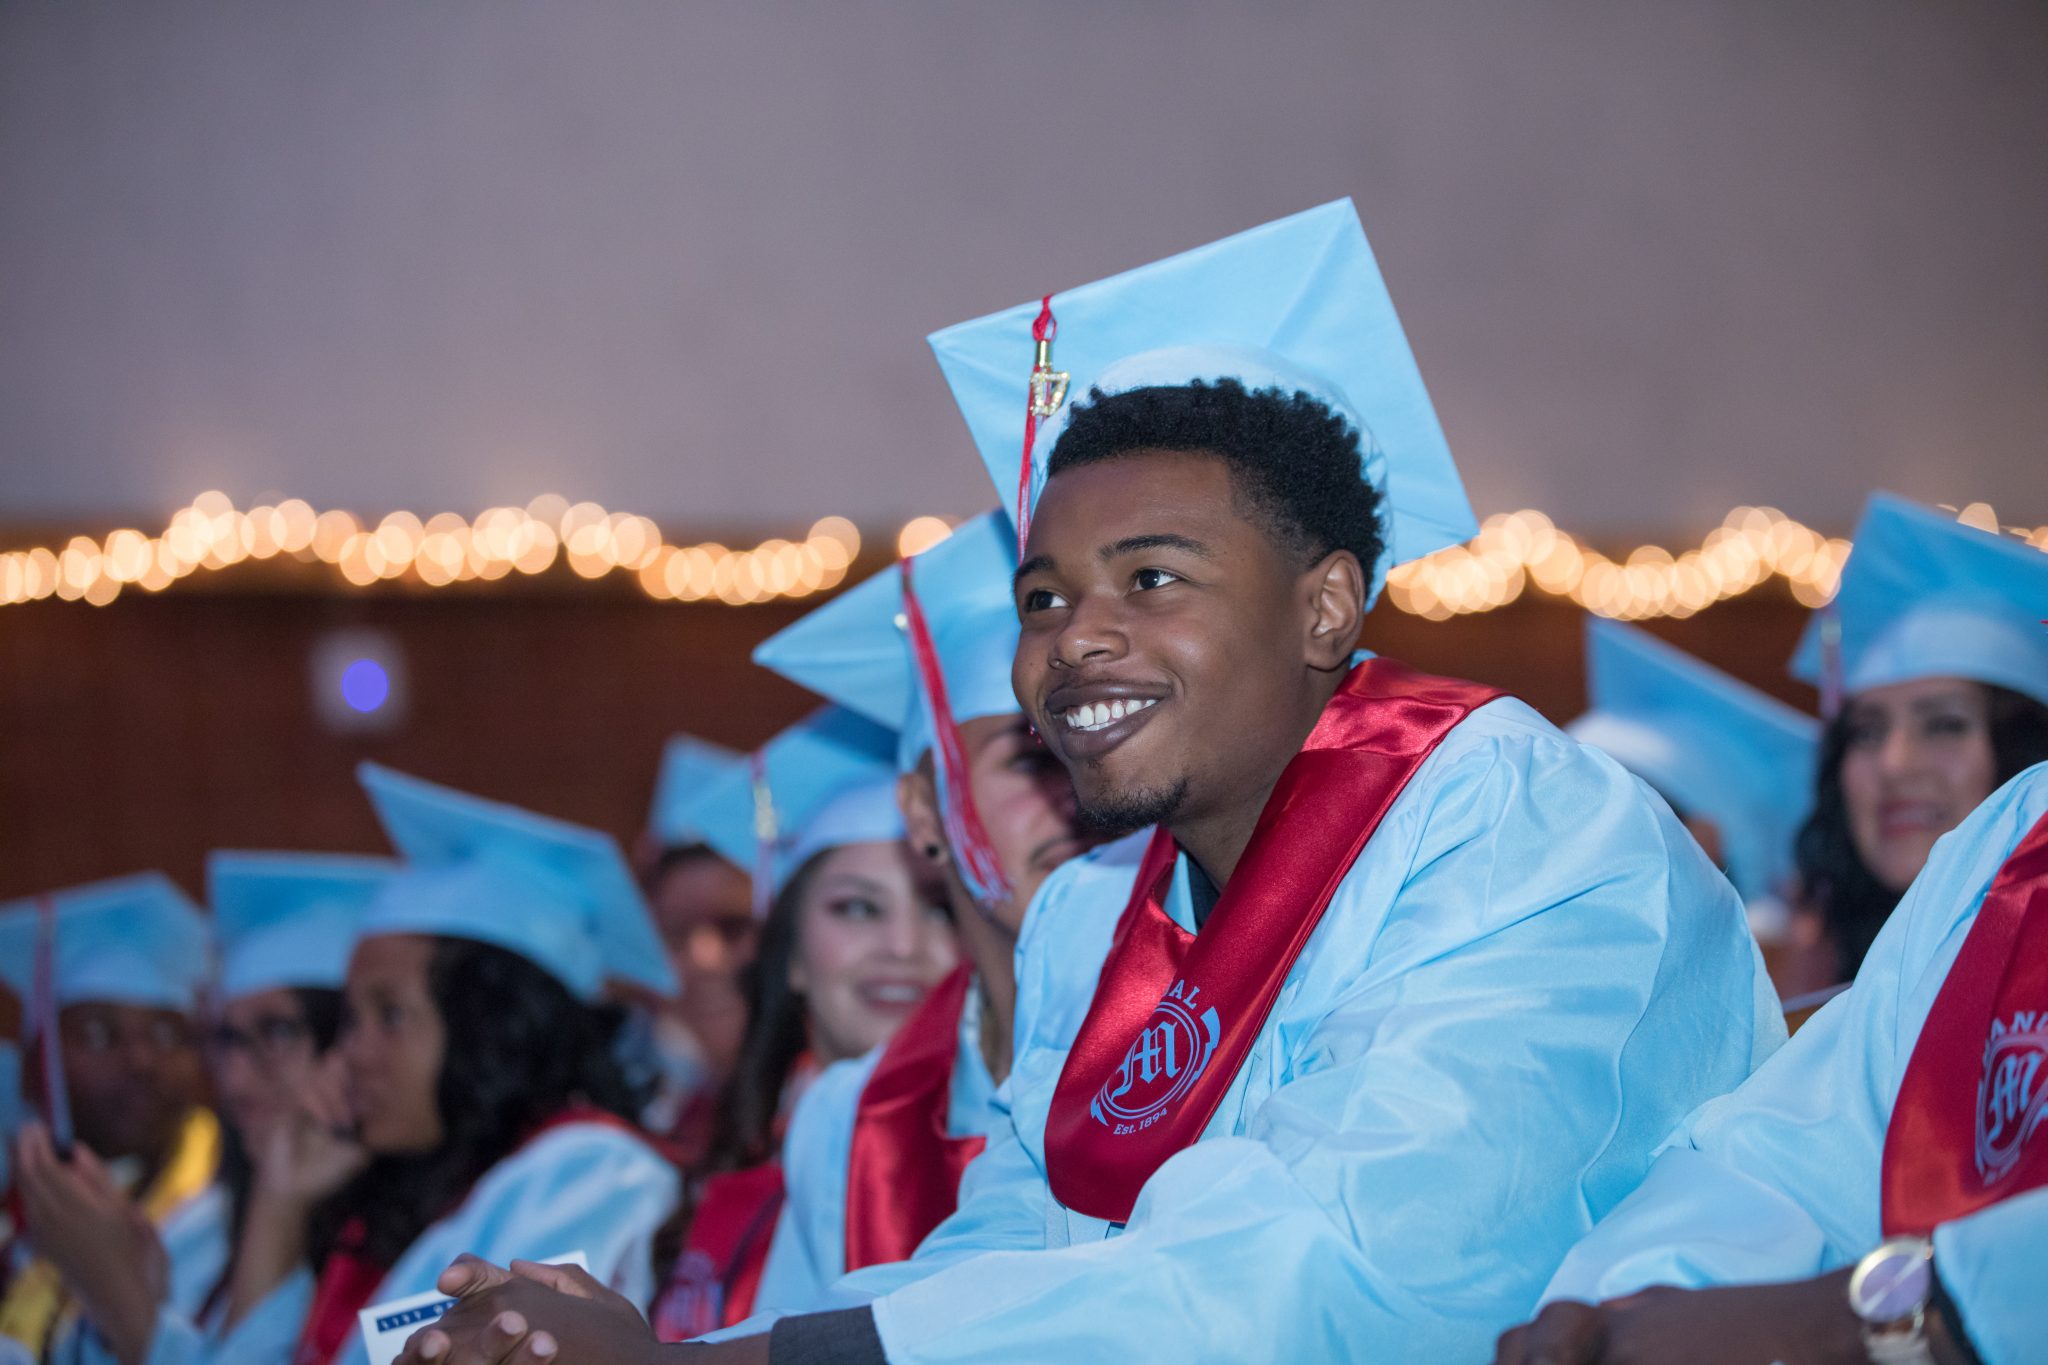 Group of kids at High School graduation wearing blue graduation gowns